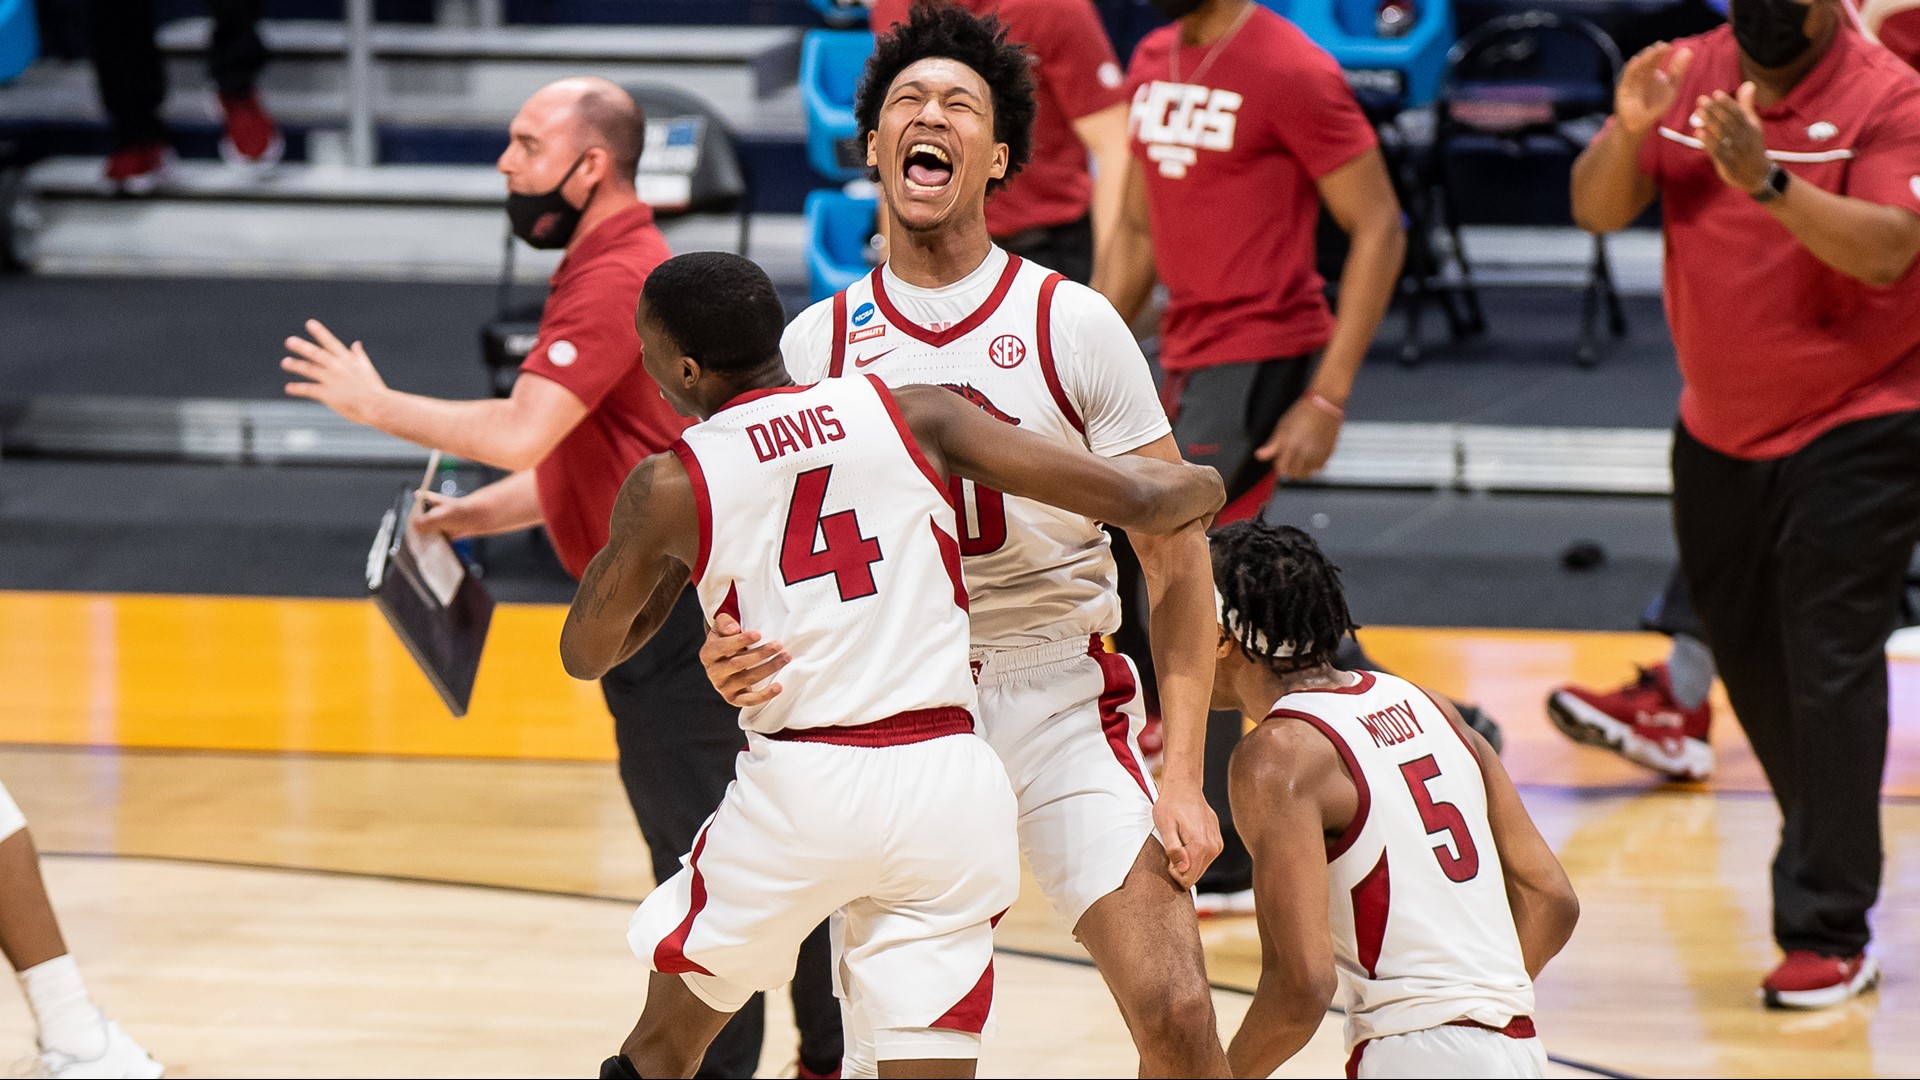 Arkansas advances to the Sweet 16 for the first time since 1996